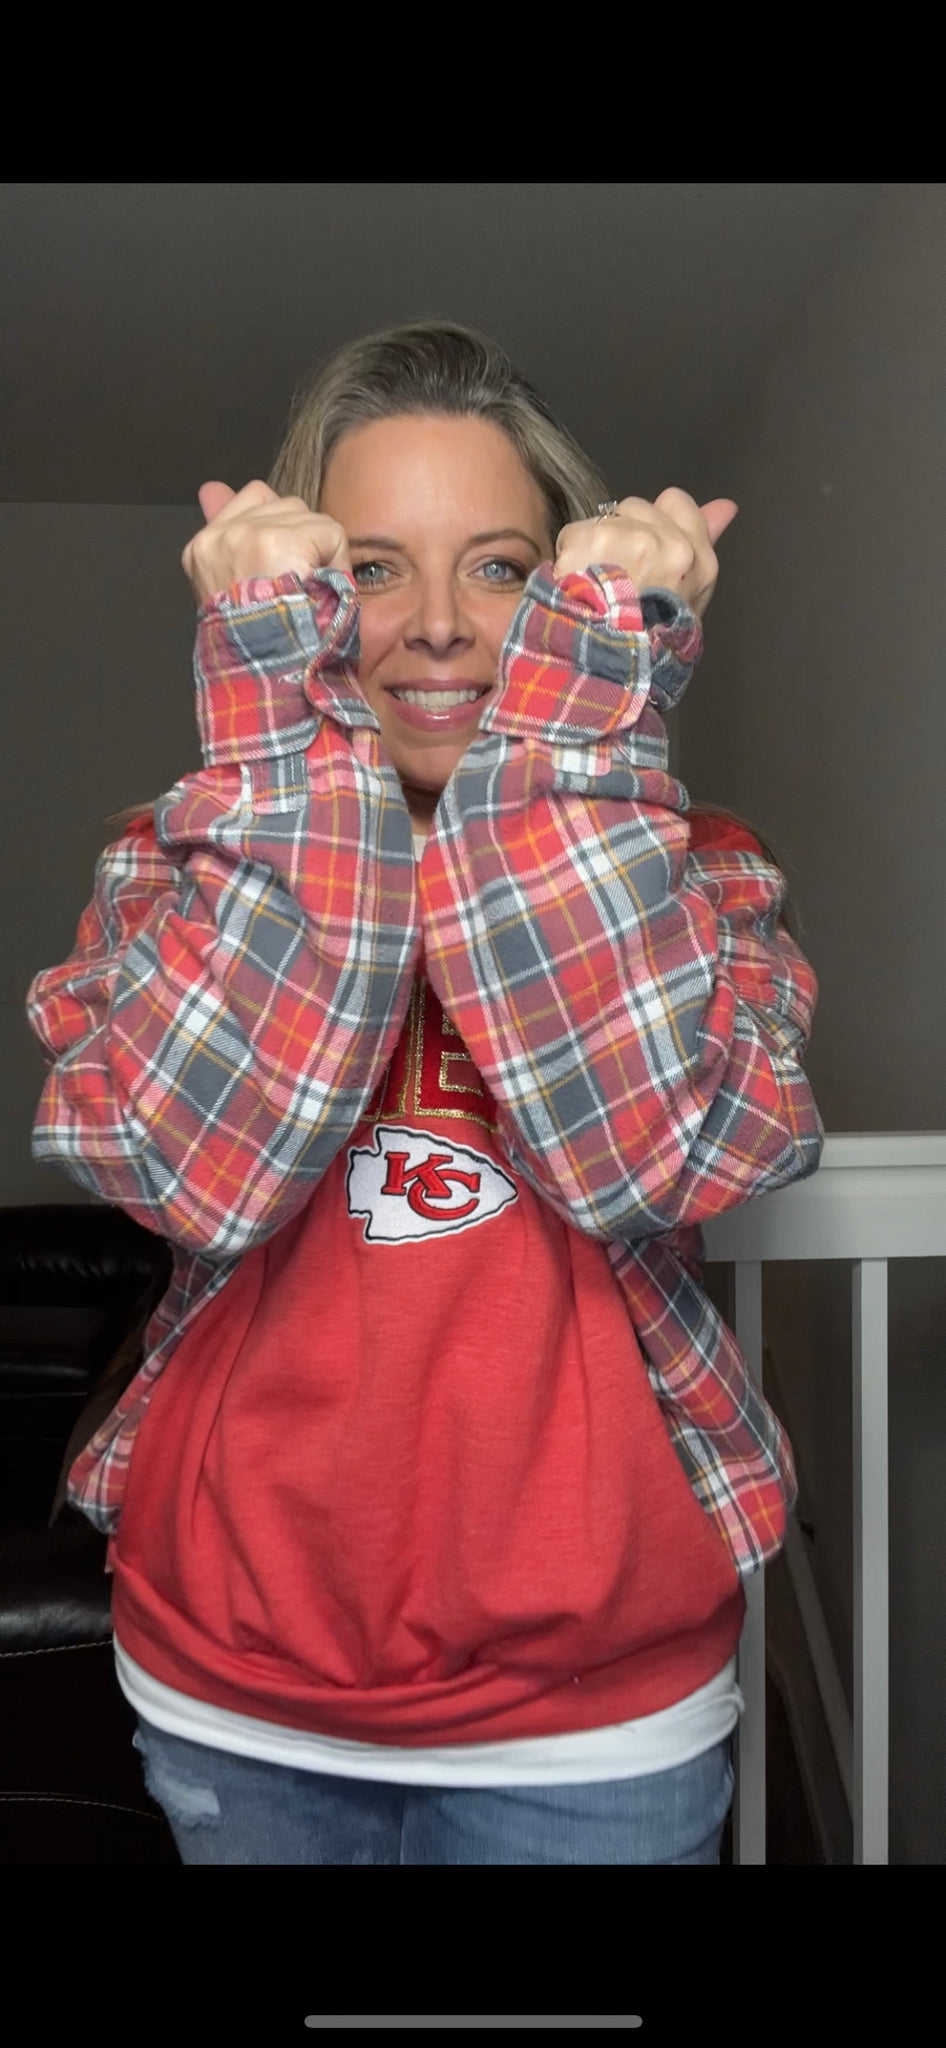 KC Chiefs - woman’s XL - bottom band not very stretchy